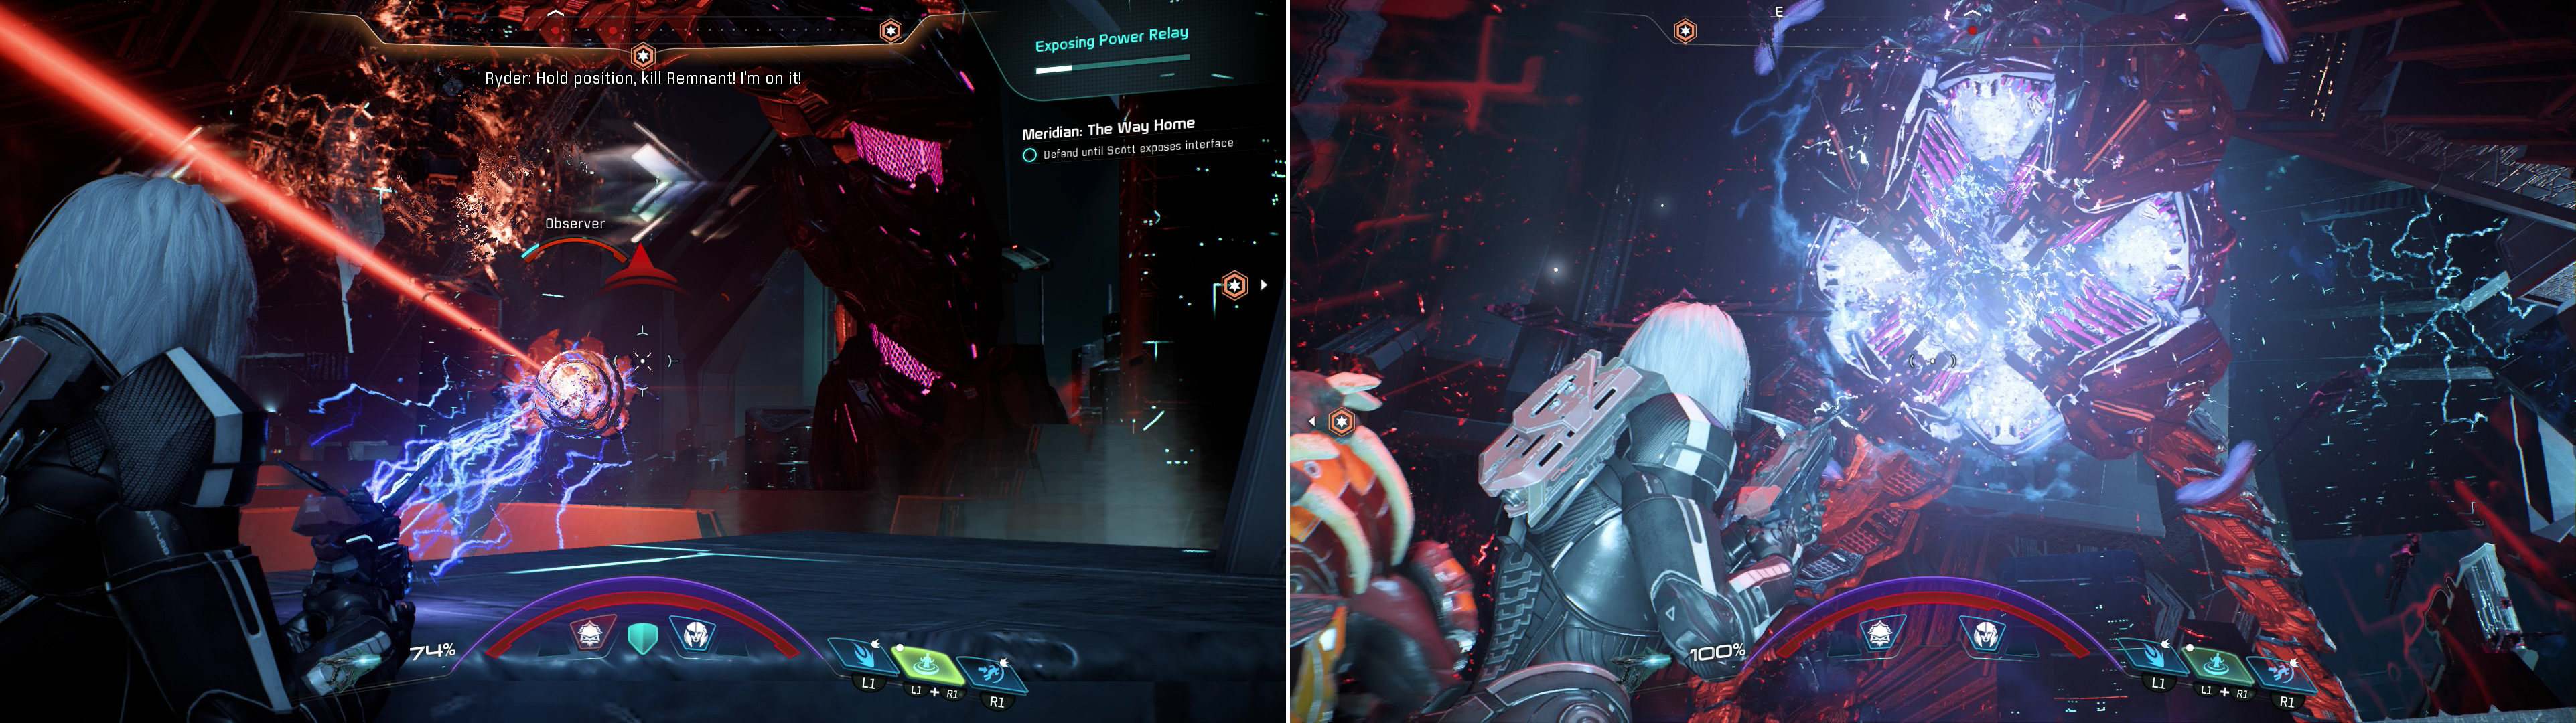 Reach the first Power Relay and fight off the Remnant that attack (left), but be wary of the Archon’s charged laser, as it penetrates cover (right).